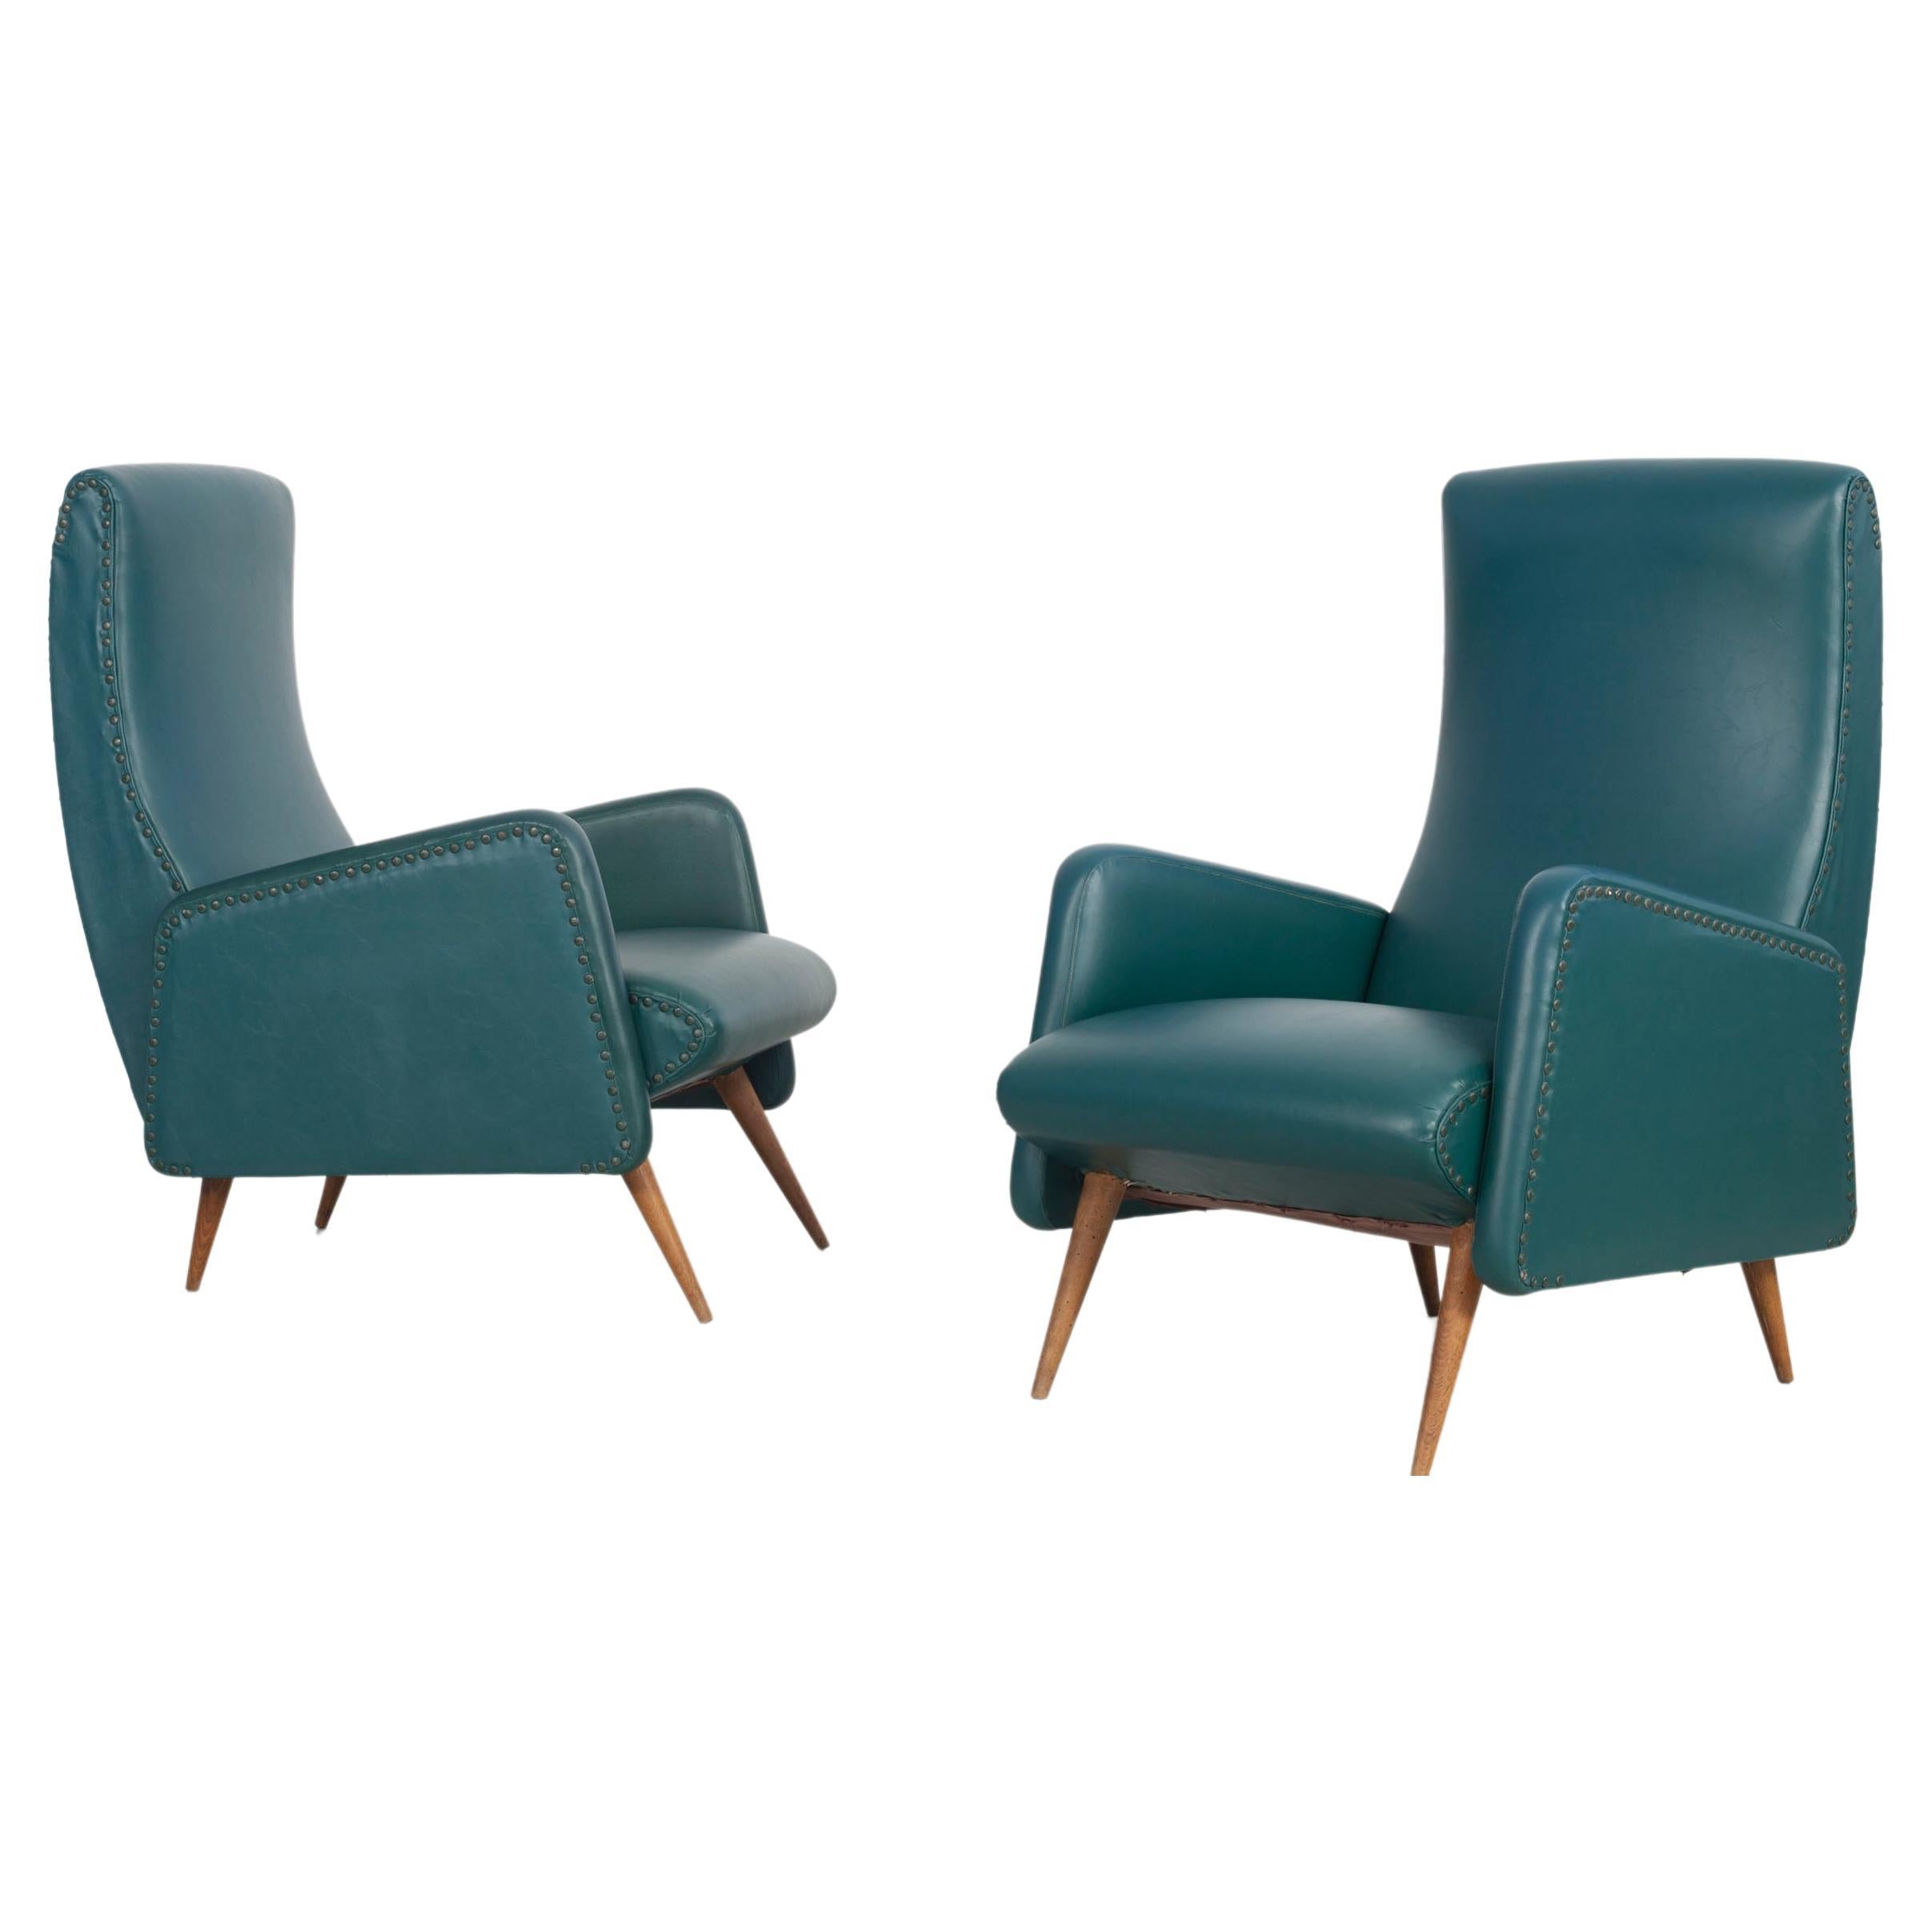 Pair of Italian Chairs in Original Green Imitation Leather Upholstery, 1950